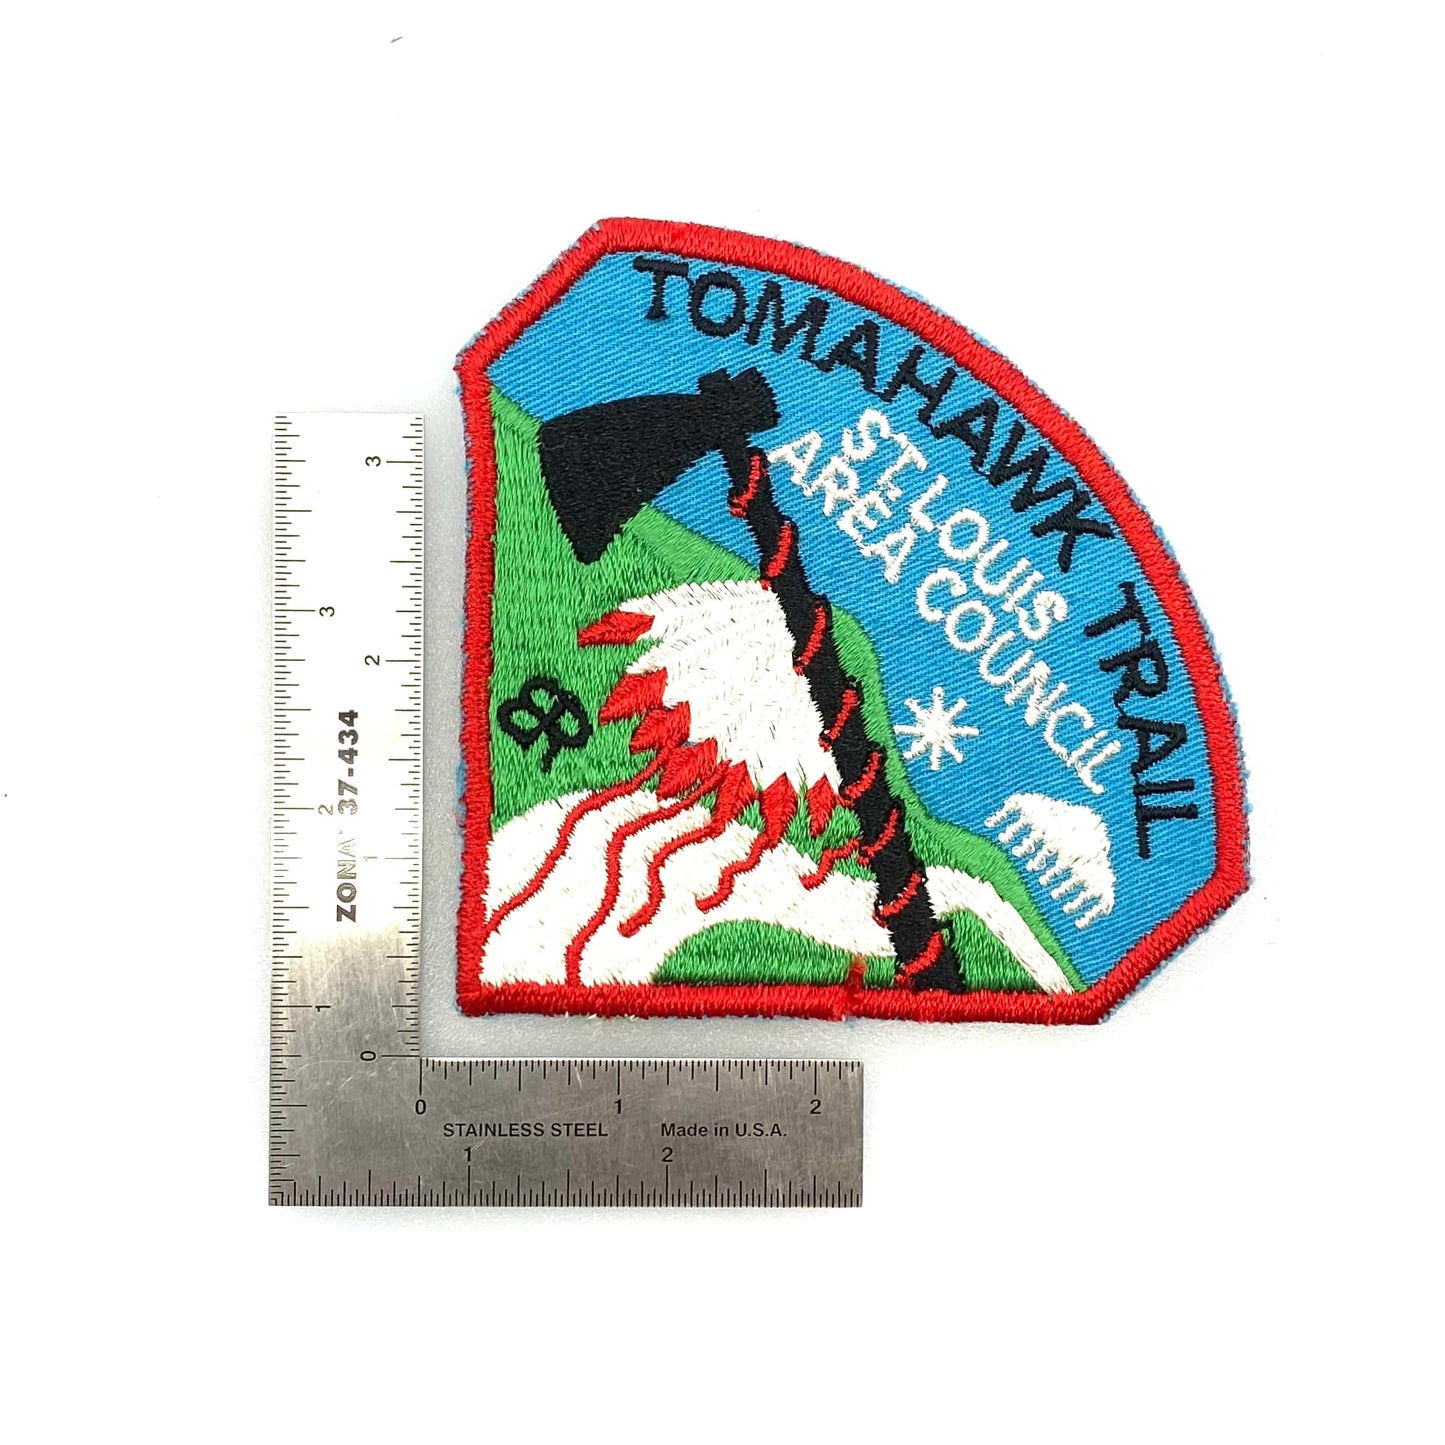 Vintage Boys Scouts of America “Tomahawk Trail St Louis Area Council” Badge Patch Diamond NEW